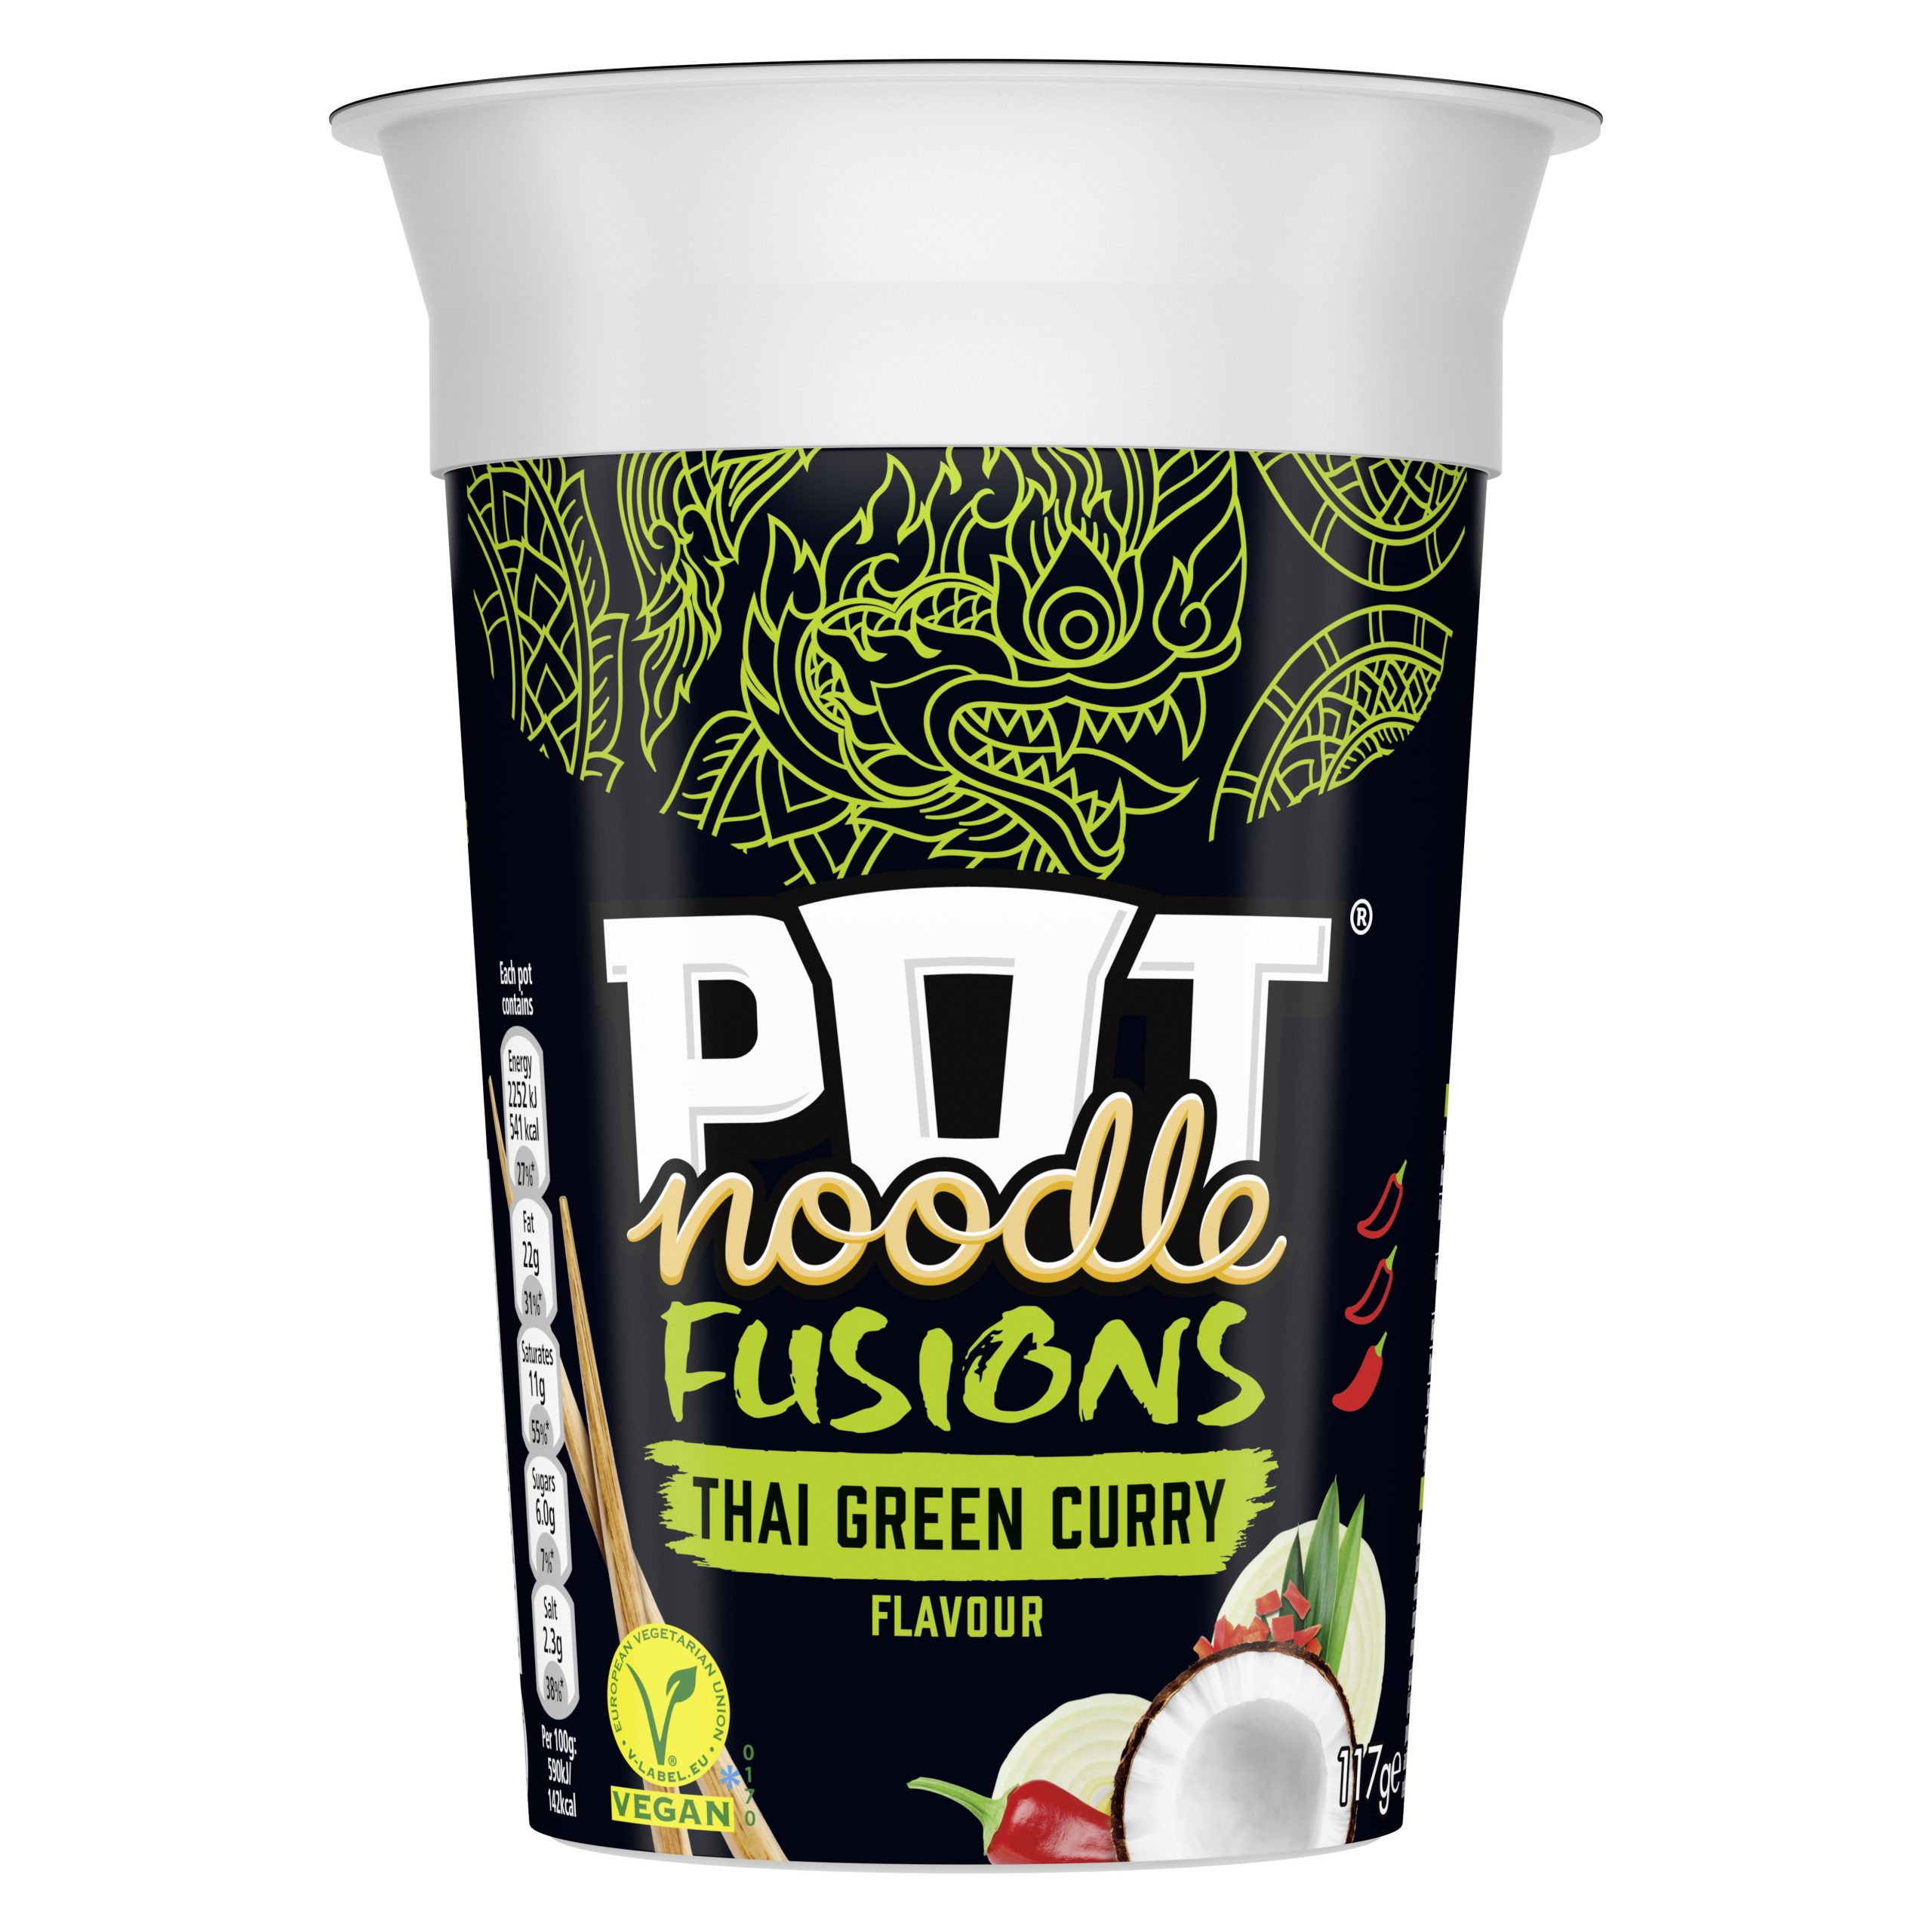 Spicy Pot Noodle Fusions launched this week